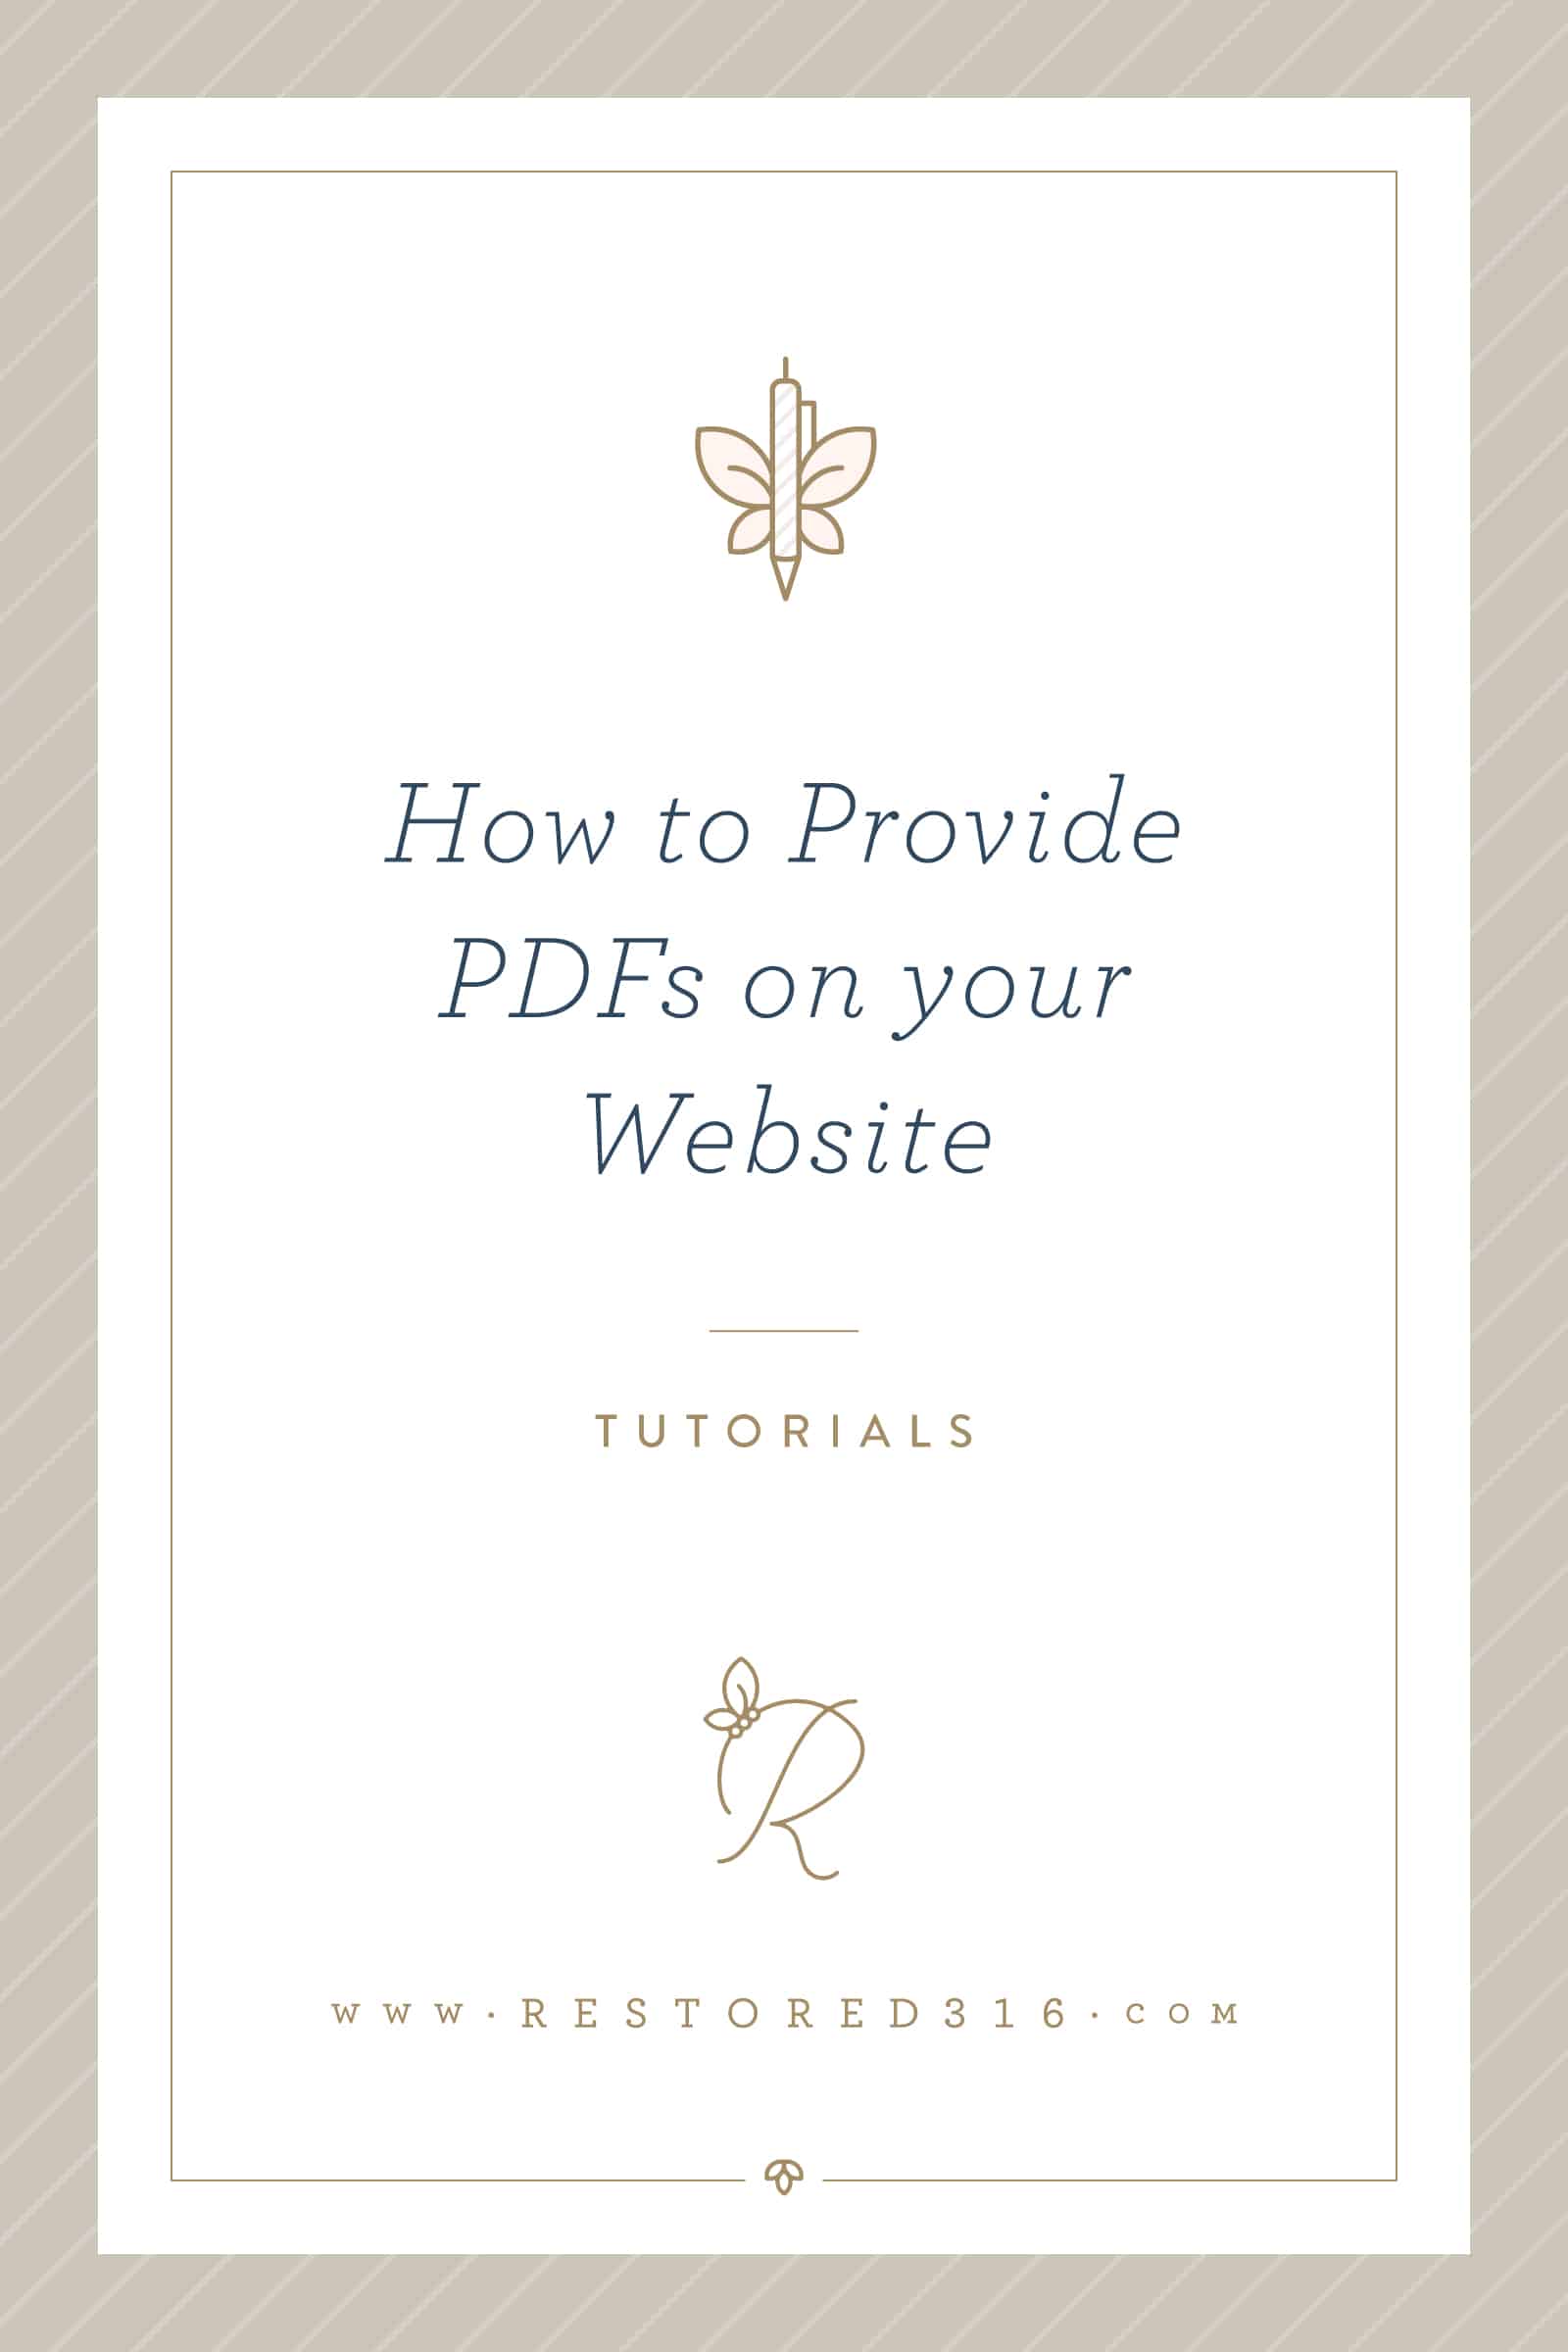 How to Provide PDFs on your Website